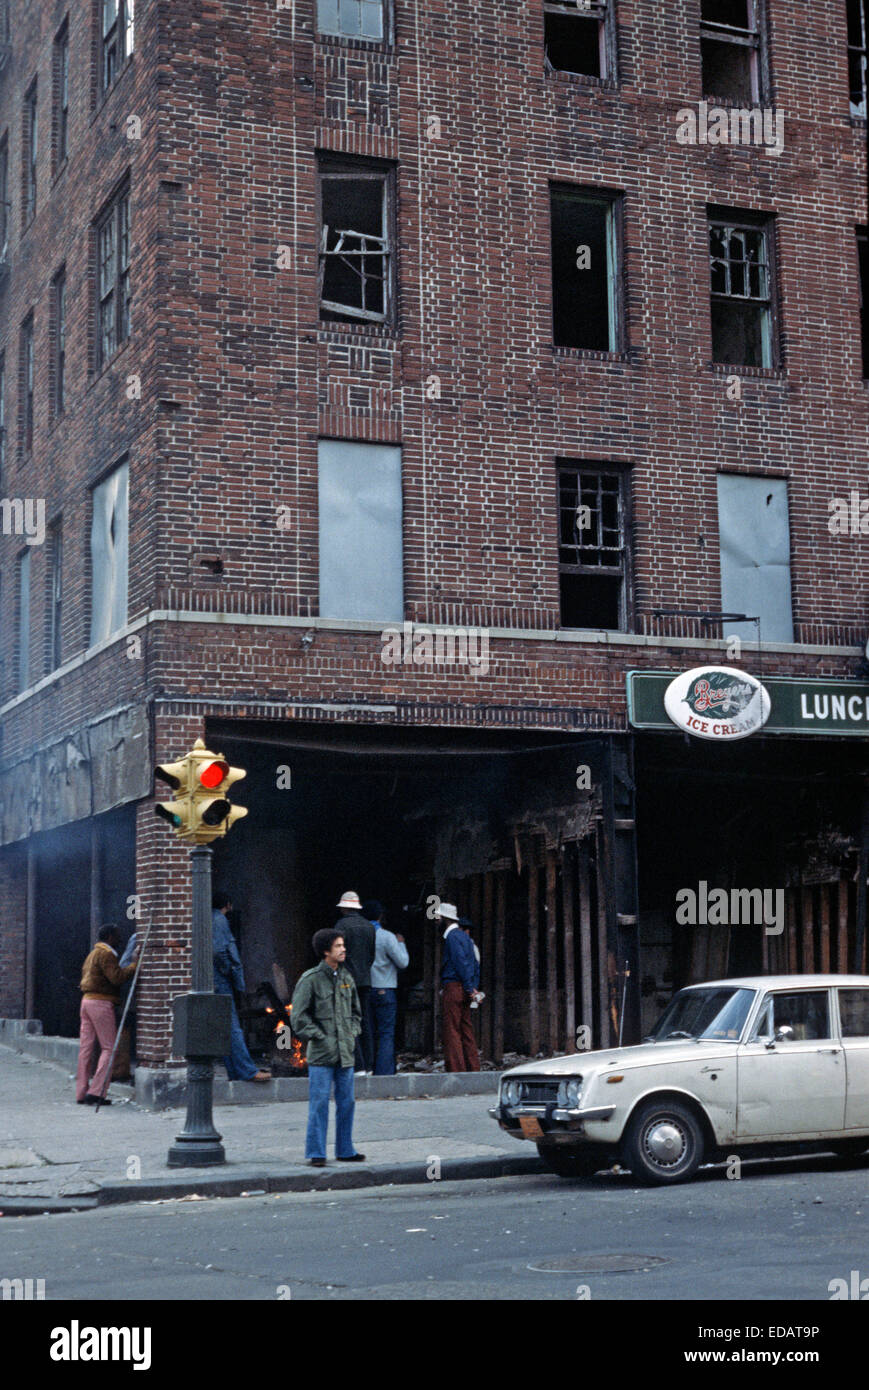 USA, SOUTH BRONX, NEW YORK CITY - AUGUST 1977. Abandoned burnt-out tenement blocks and shops,  South Bronx, New York City, USA. Stock Photo